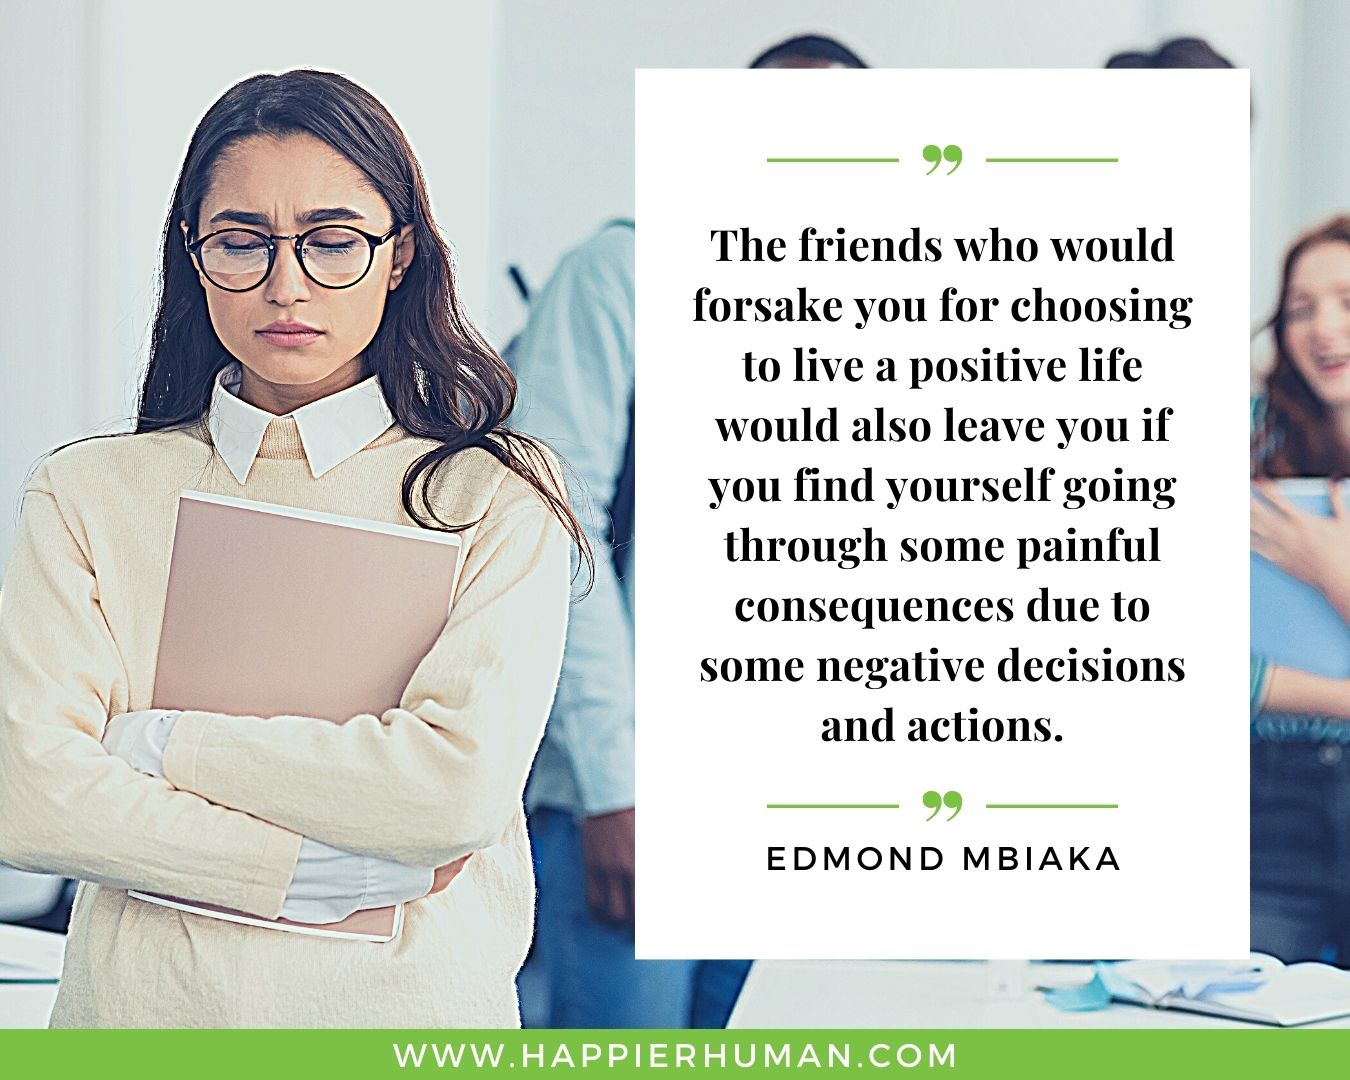 Toxic People Quotes - “The friends who would forsake you for choosing to live a positive life would also leave you if you find yourself going through some painful consequences due to some negative decisions and actions.” – Edmond Mbiaka